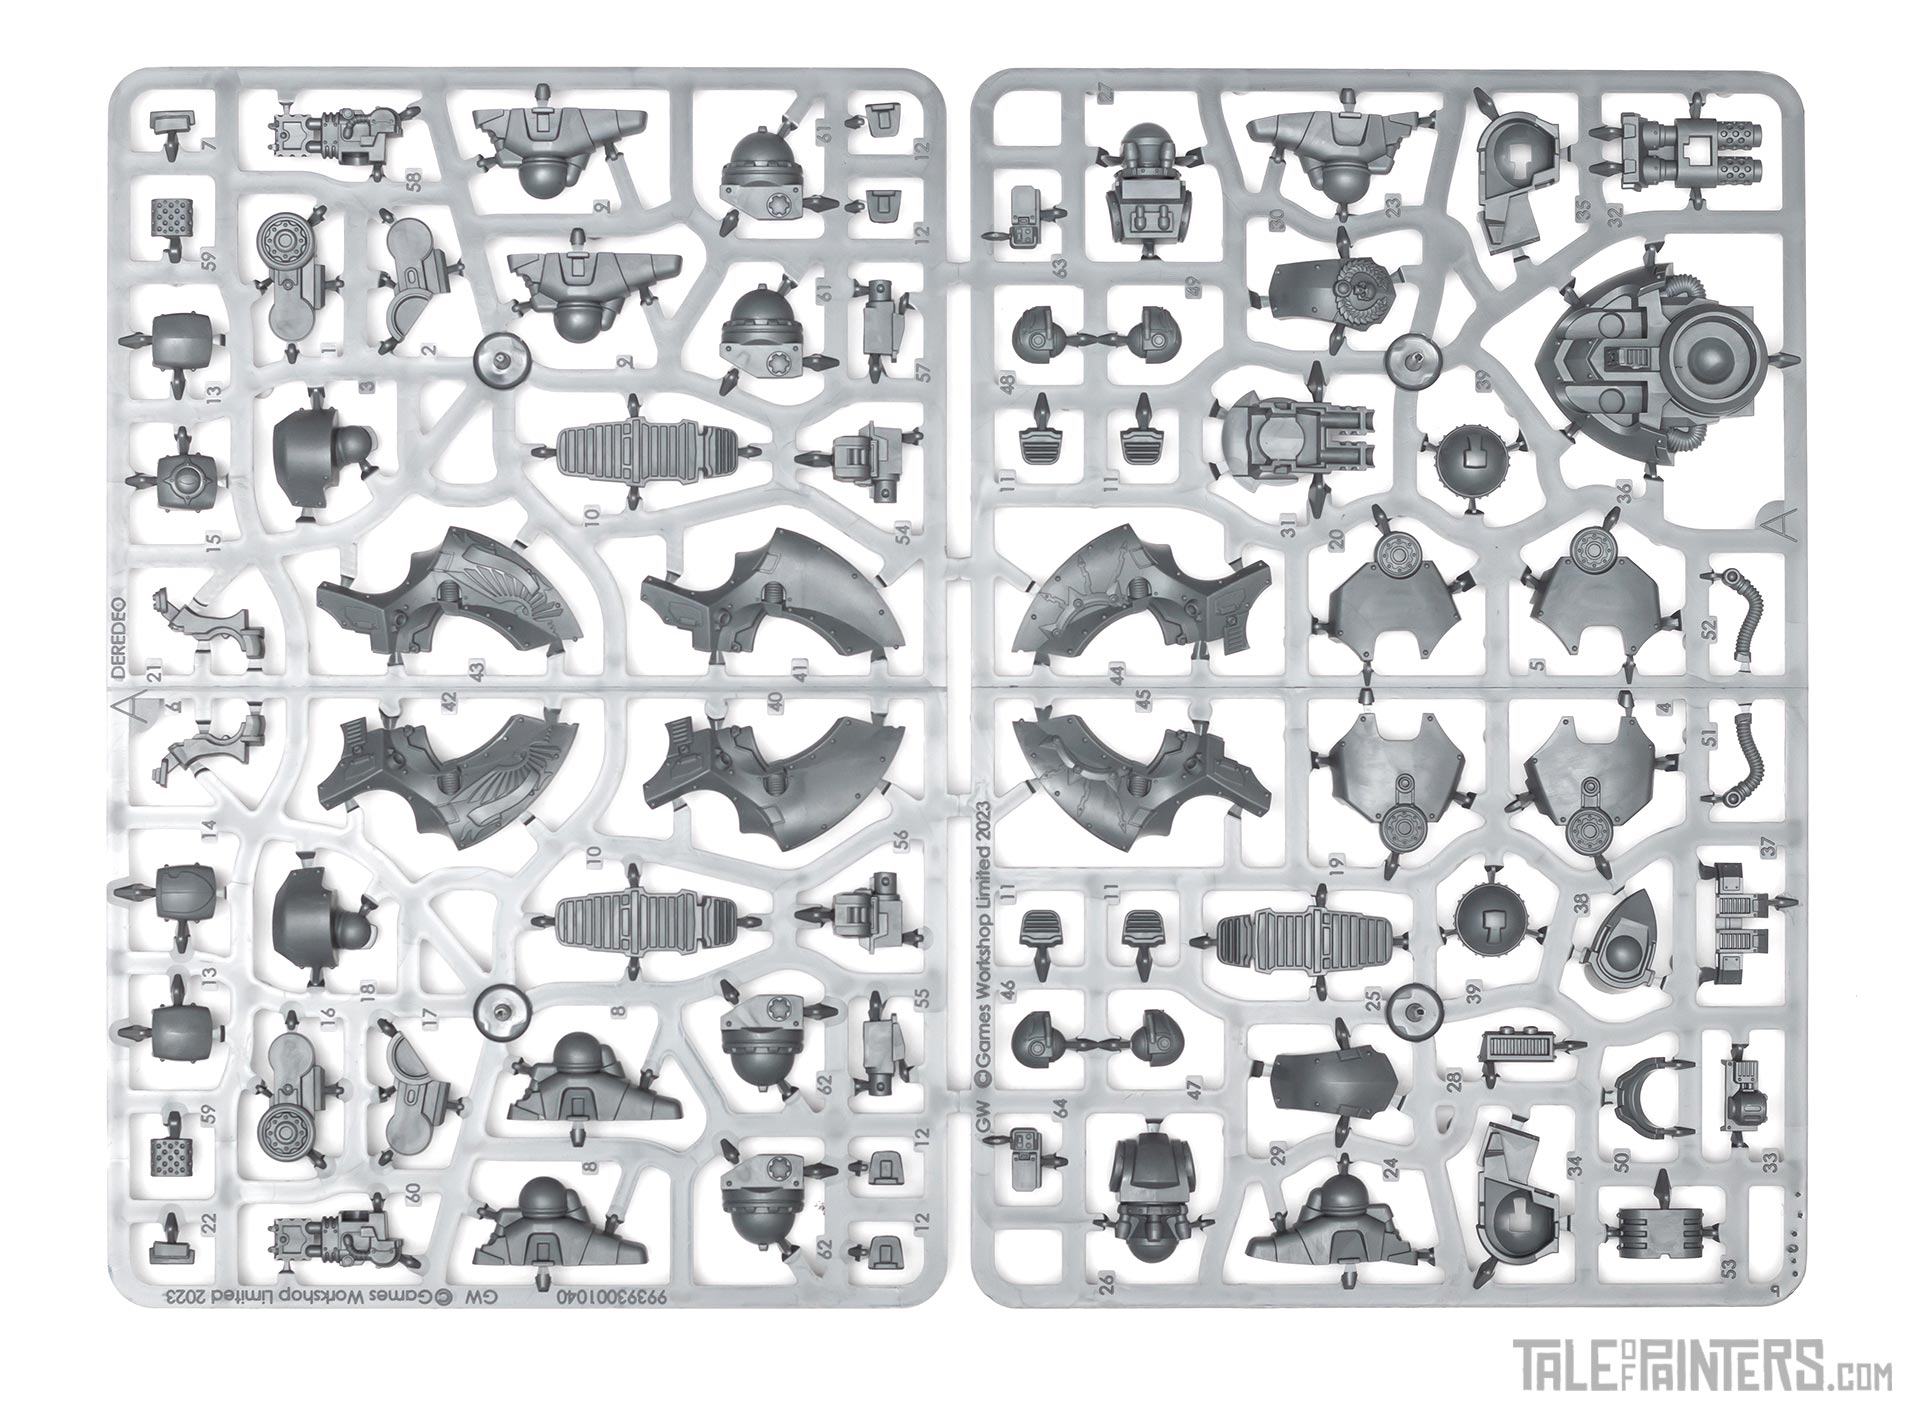 Horus Heresy Deredeo Dreadnought in Anvilus Configuration sprues 1 and 2